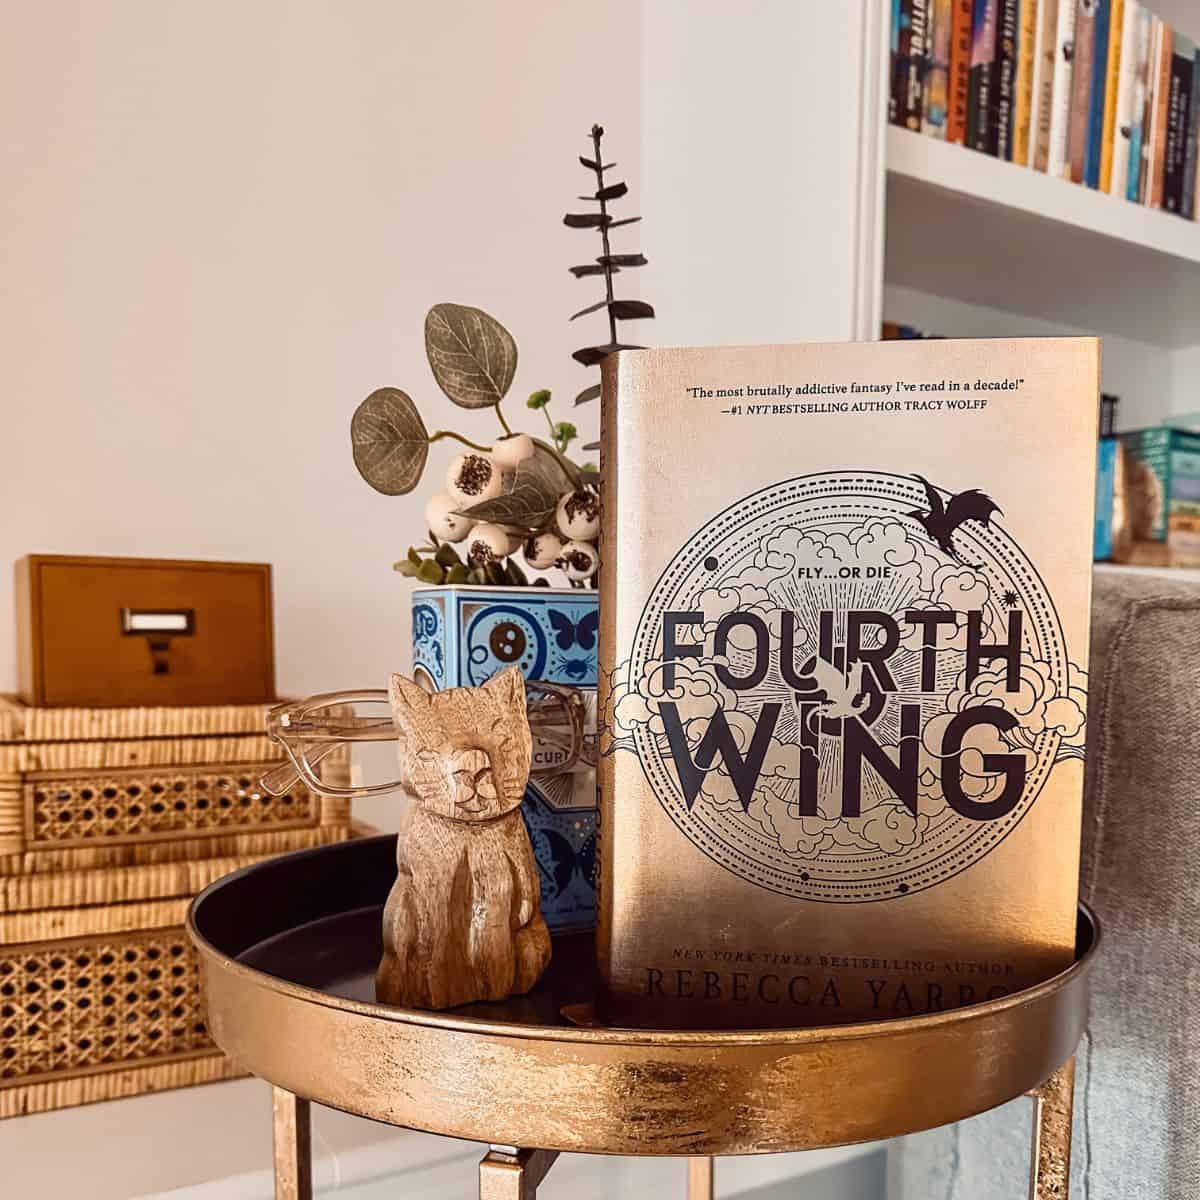 fourth wing by rebecca yarros in a reading room.